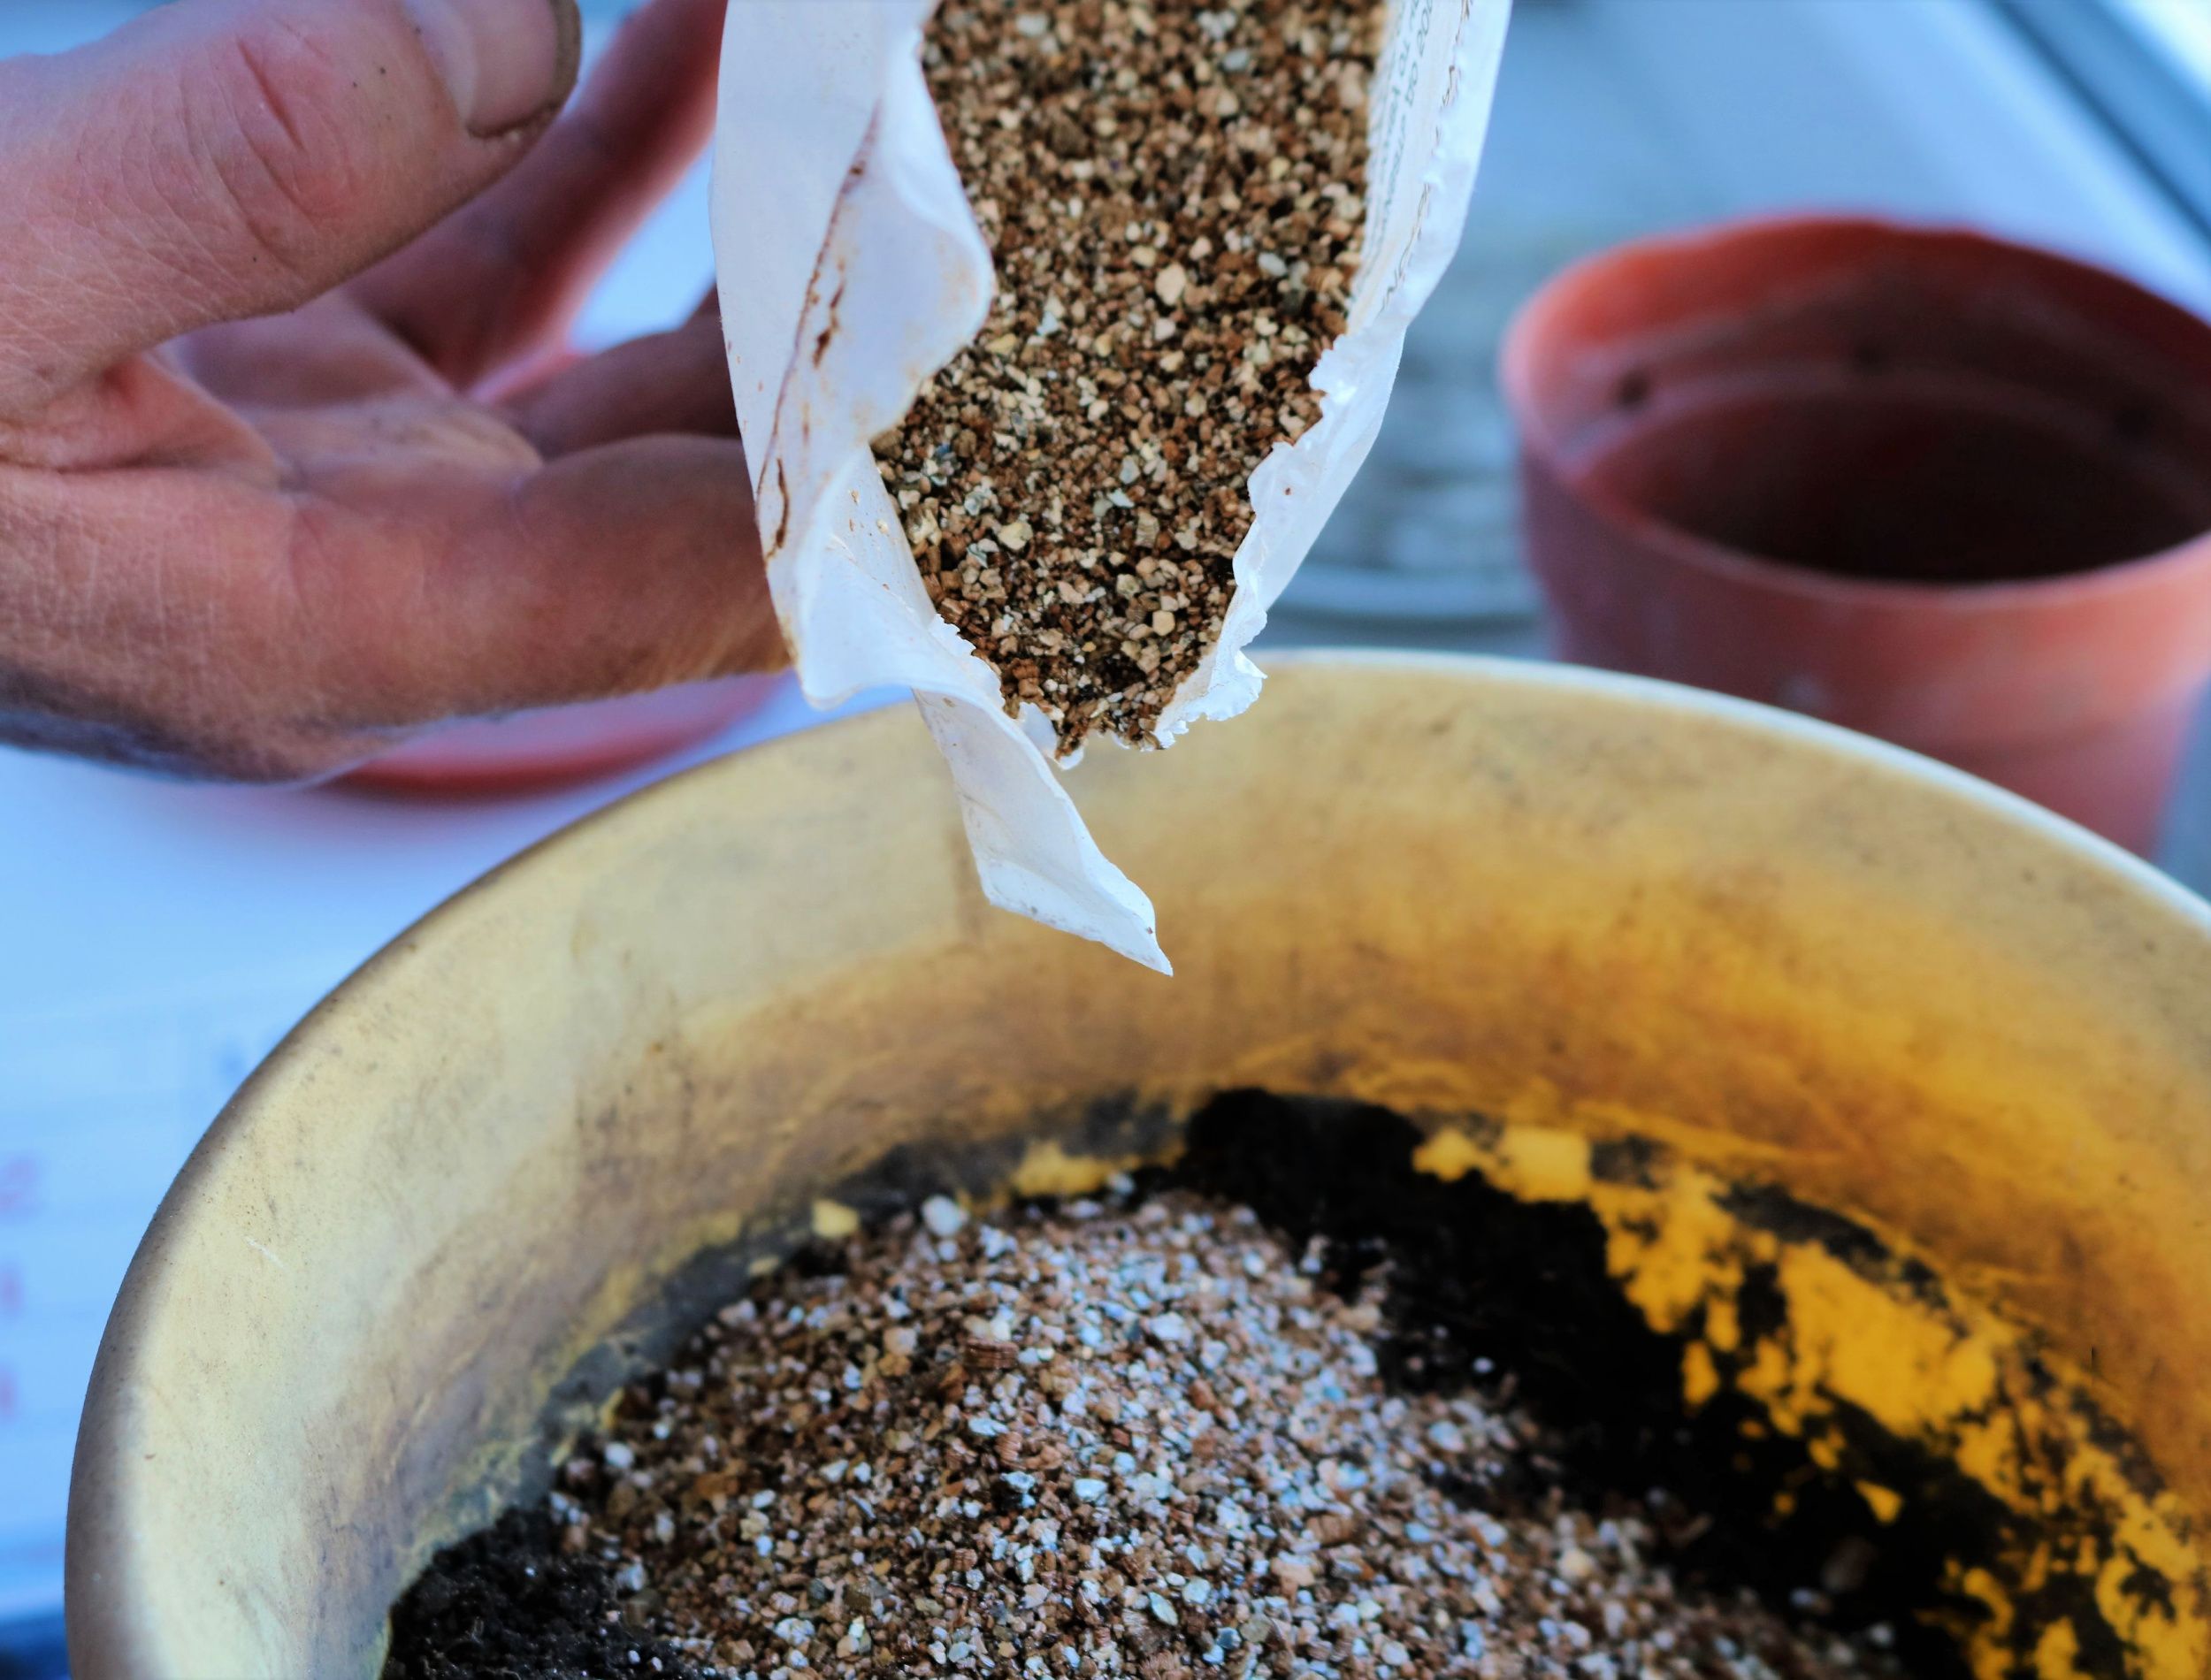 pouring vermiculite from a factory package into a pot of soil to prepare a mixed soil for seed germination in the spring, adding granules to improve potting soil for seedlings at home